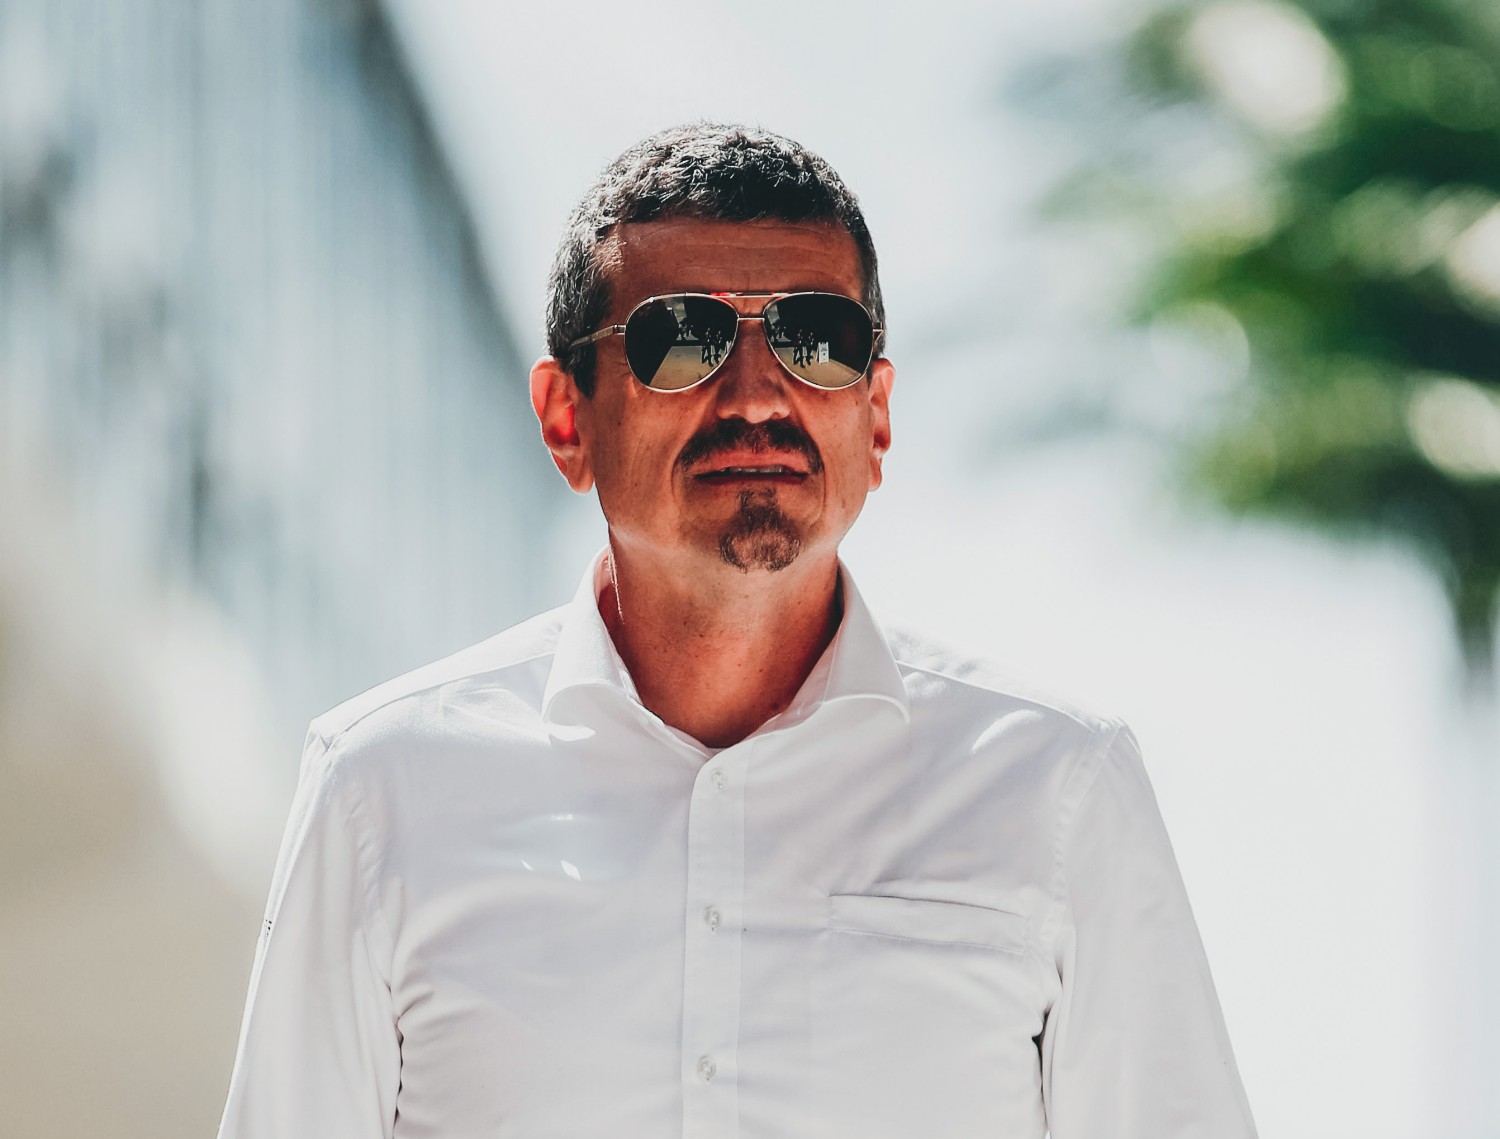 Guenther Steiner, Team Principal, Haas F1 in the paddock during the F1 Miami Grand Prix on Saturday, May 7th, 2022 in Miami Gardens, Fla. (Zak Mauger/LAT)